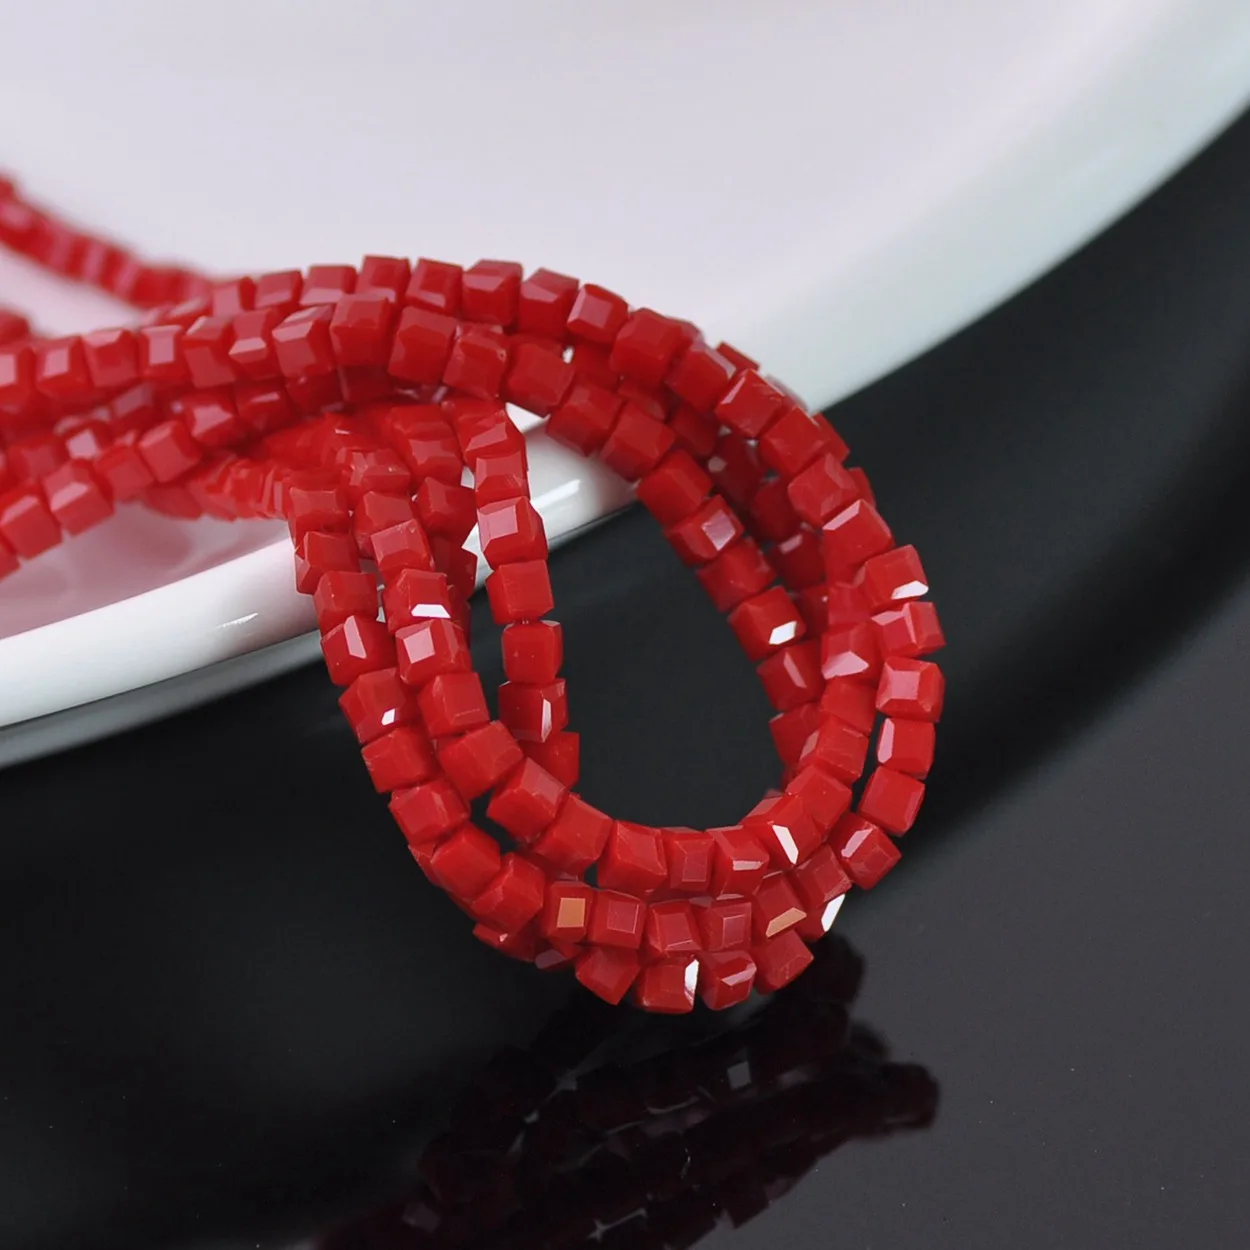 200pcs Opaque Deep Red 3mm Small Cube Square Faceted Czech Crystal Glass Loose Crafts Beads Wholesale lot for Jewelry Making DIY cube ball bead earring pendant silicone mold square oval bracelet beaded epoxy mold diy jewelry making necklace bracelet tools